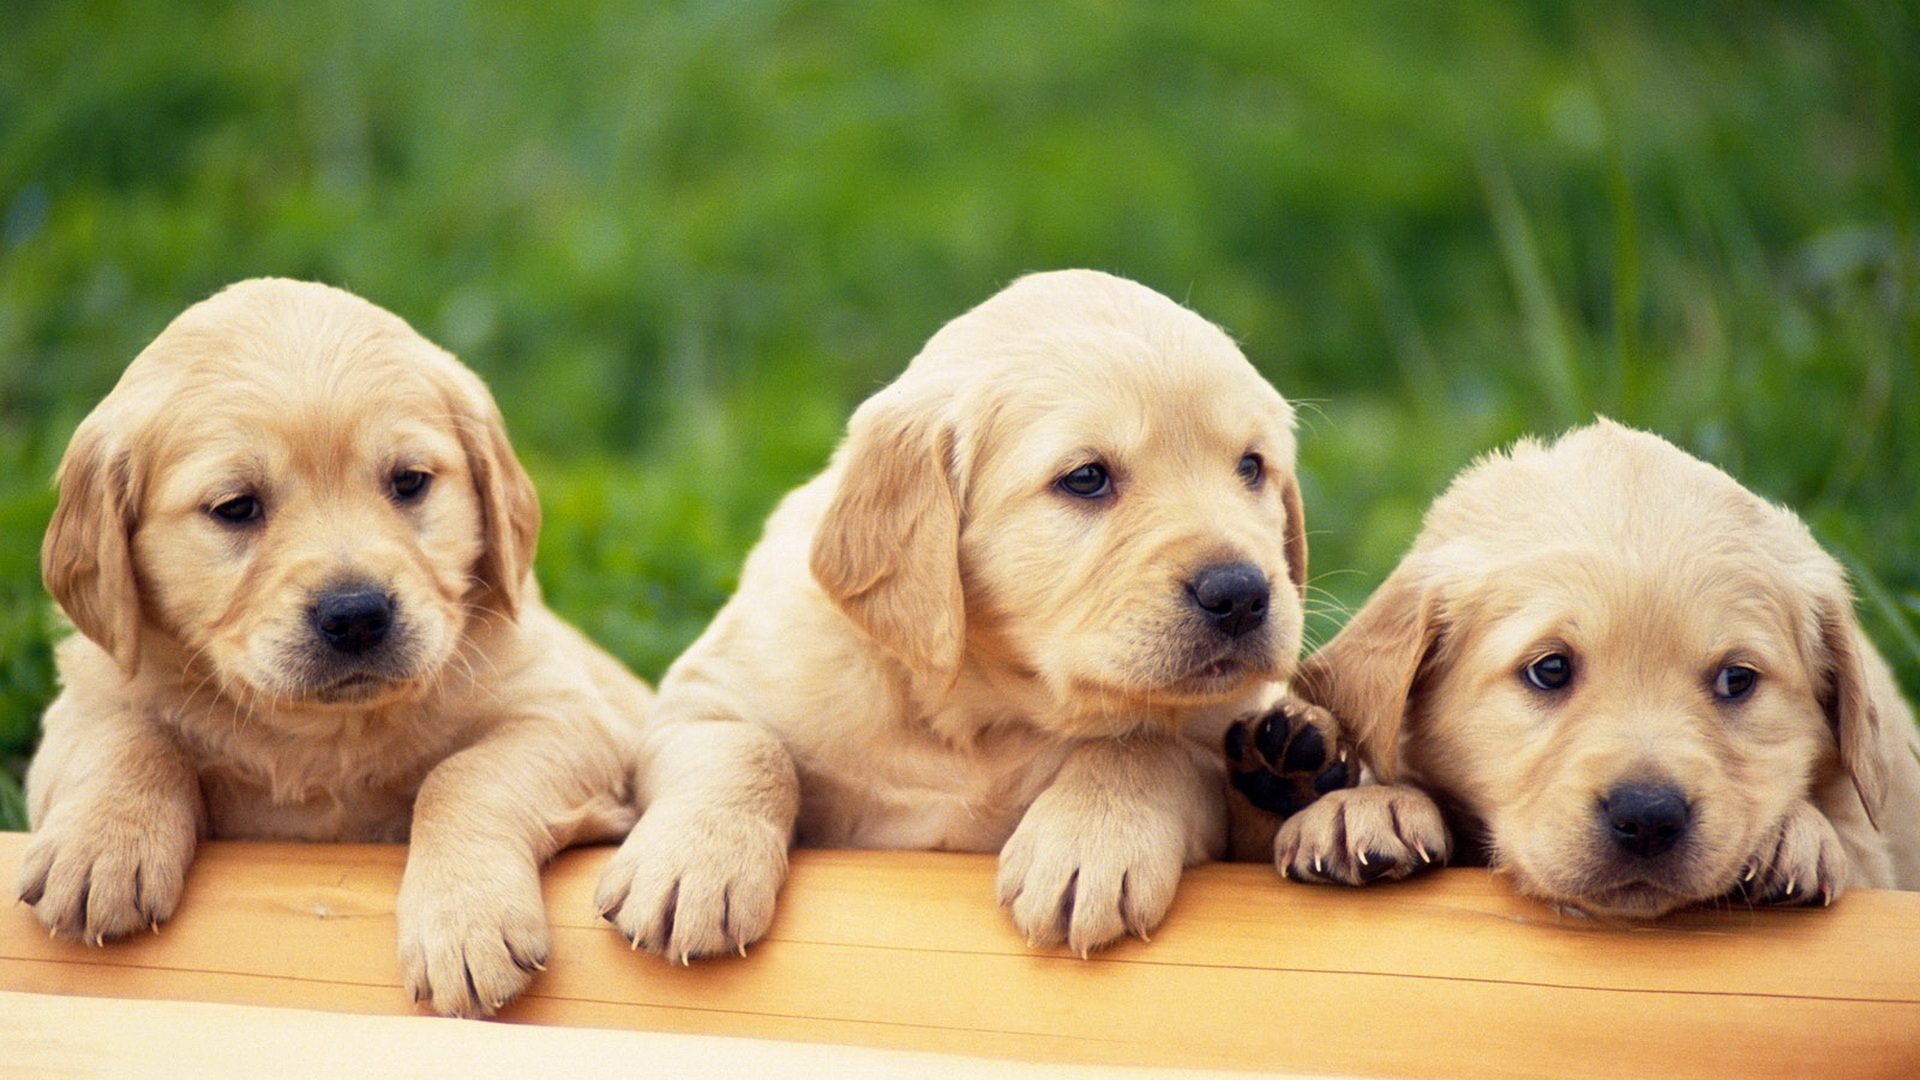 Cute Puppy wallpapers HD